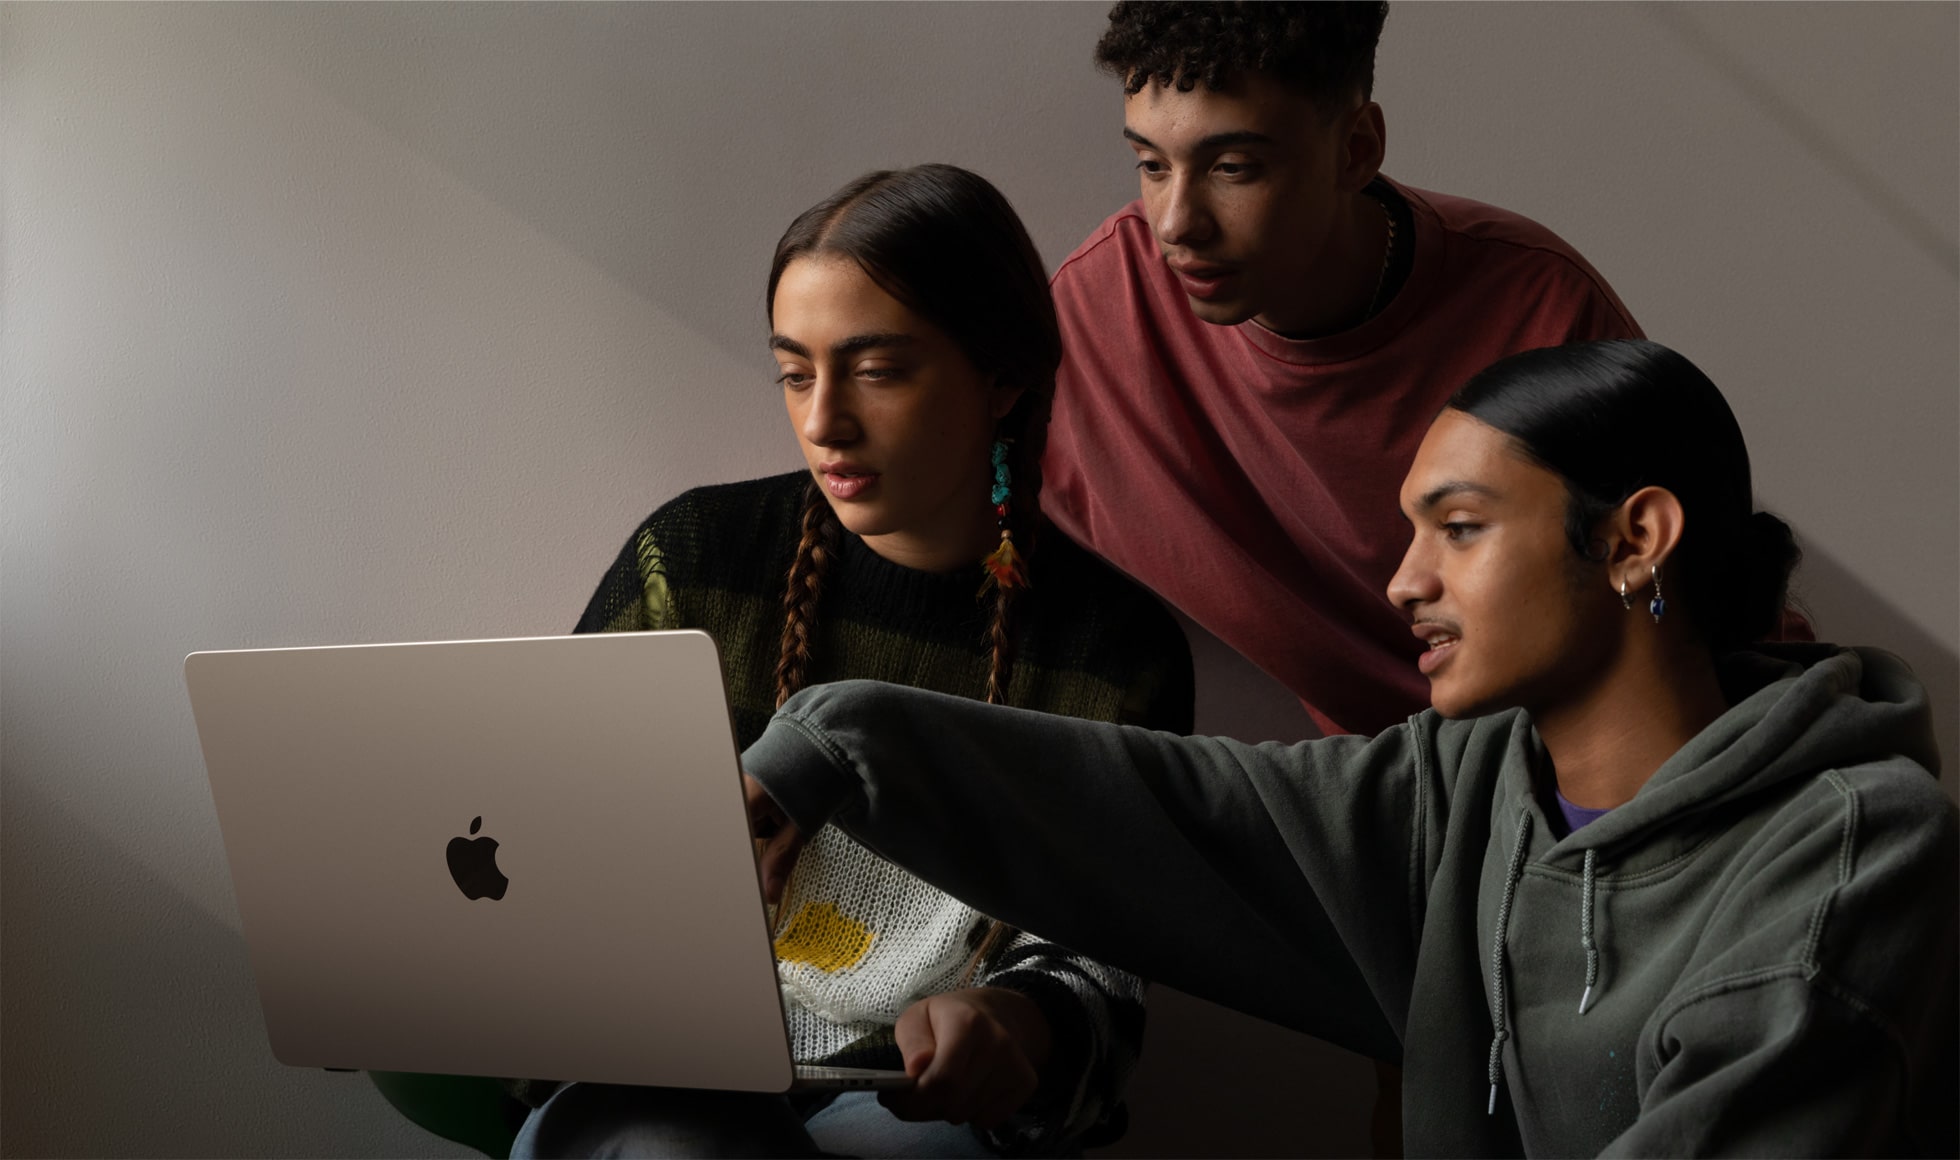 Three people sit in front of a 15-inch MacBook Air, which is seen from the back.